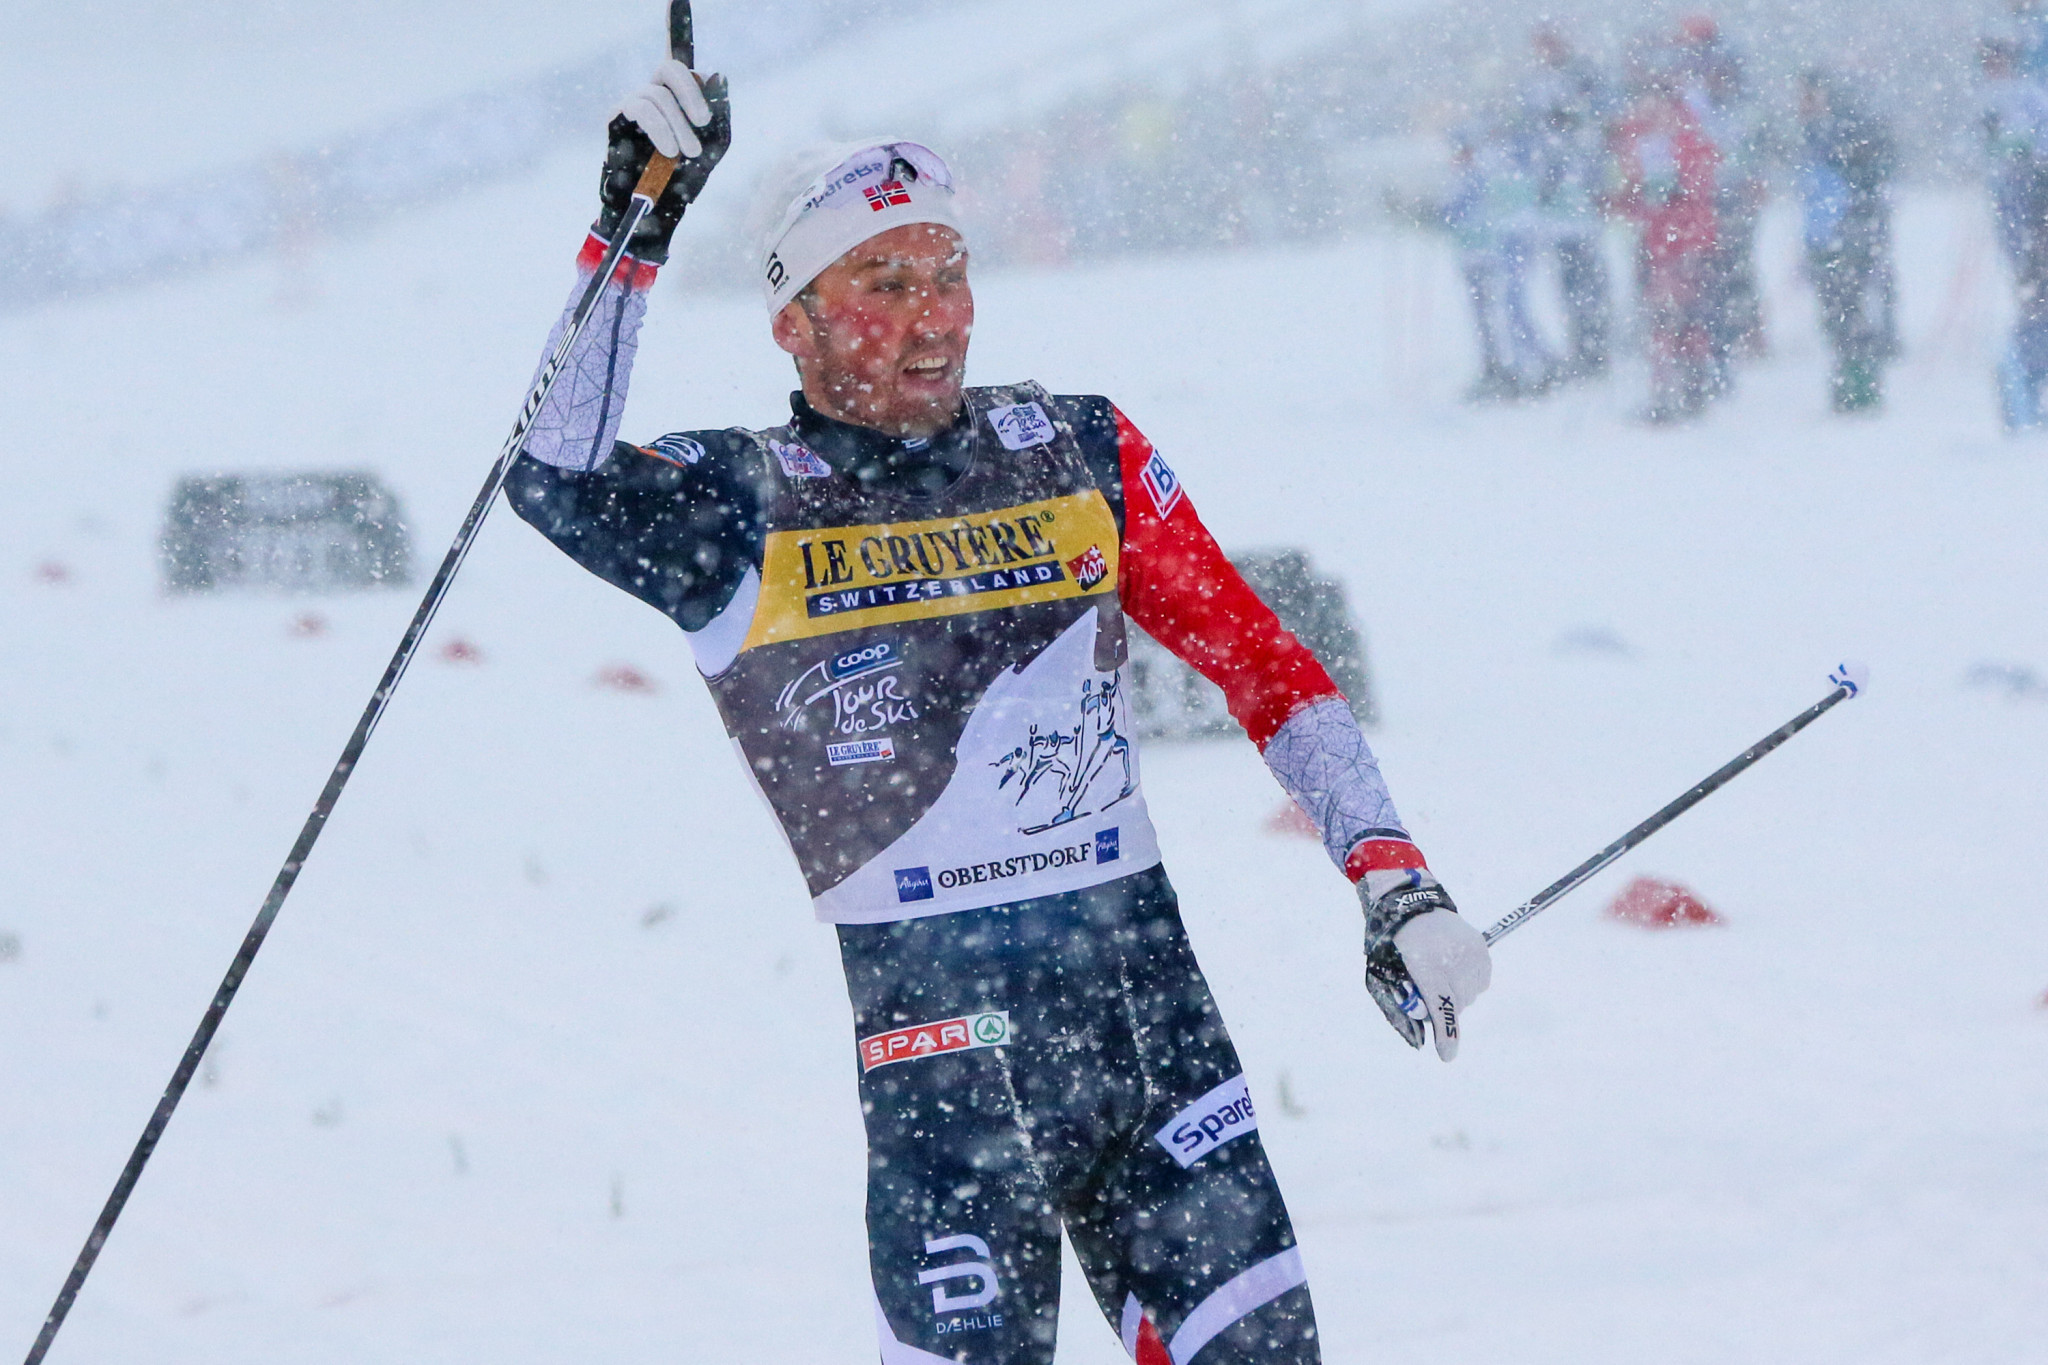 Emil Iversen won today's men's race and now sits third in the overall standings ©Getty Images